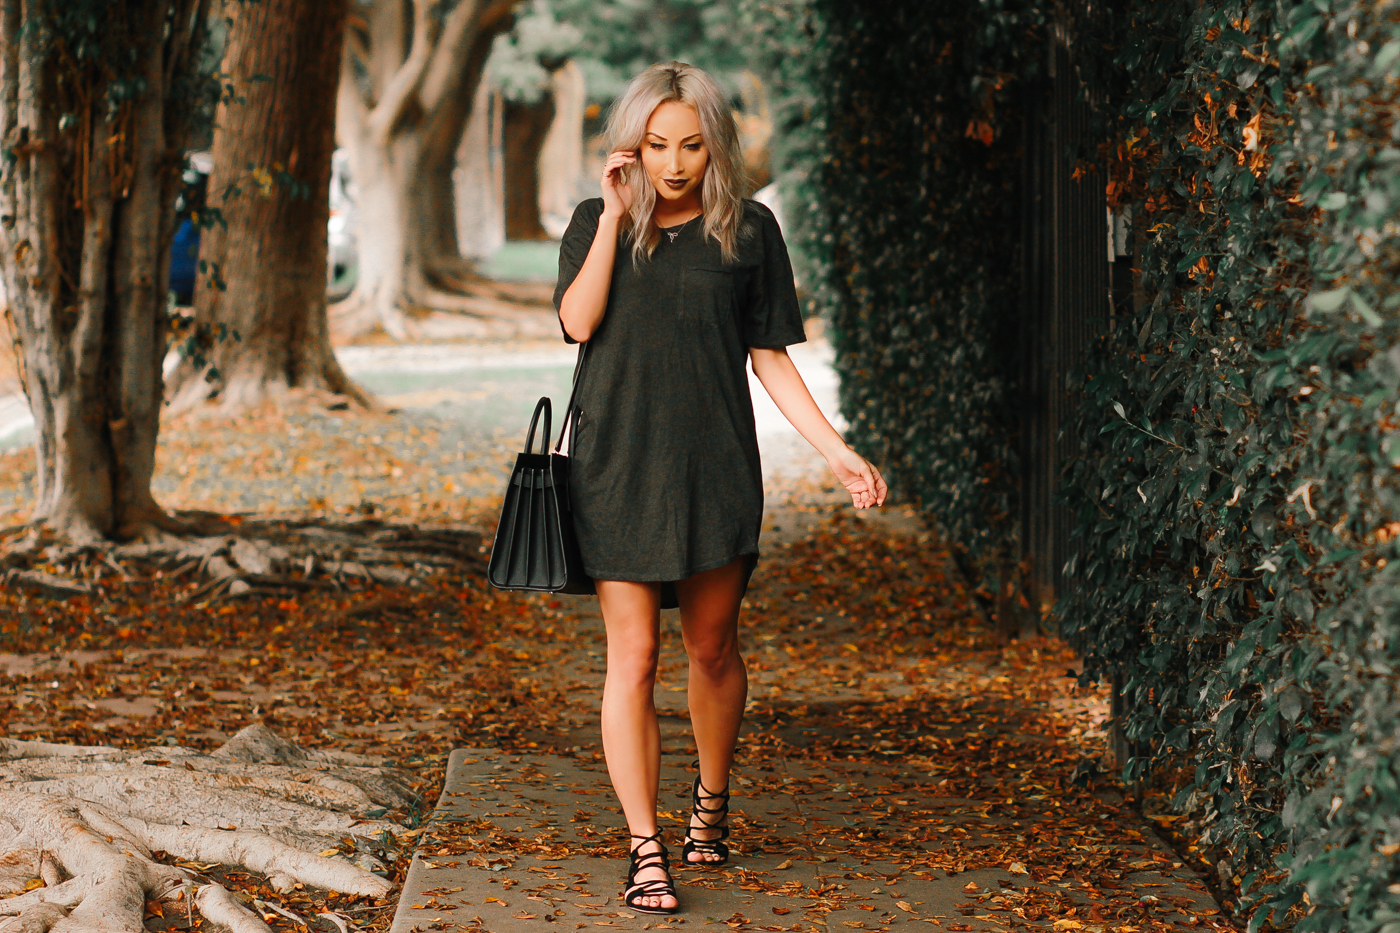 Blondie in the City | Men's Tee as a Women's T-Shirt Dress from @UrbanOutfitters